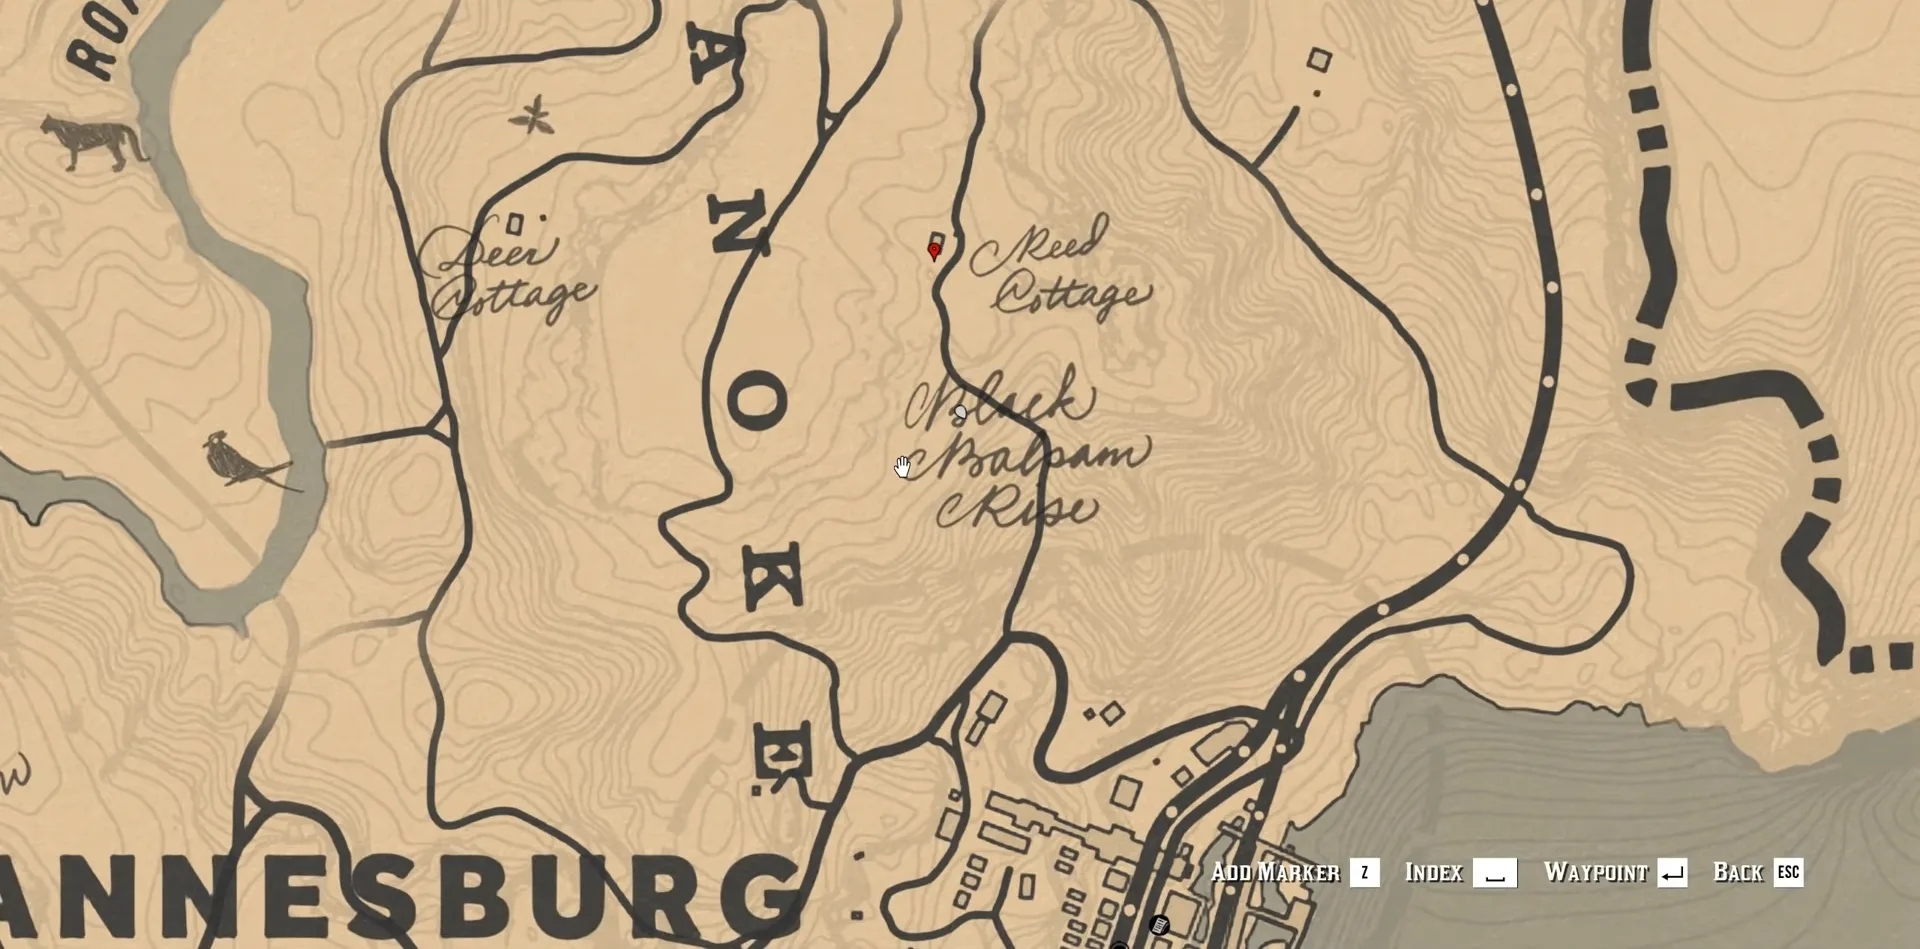 Annesburg Sketched Map location  - Red Dead Redemption 2 Gold Bars